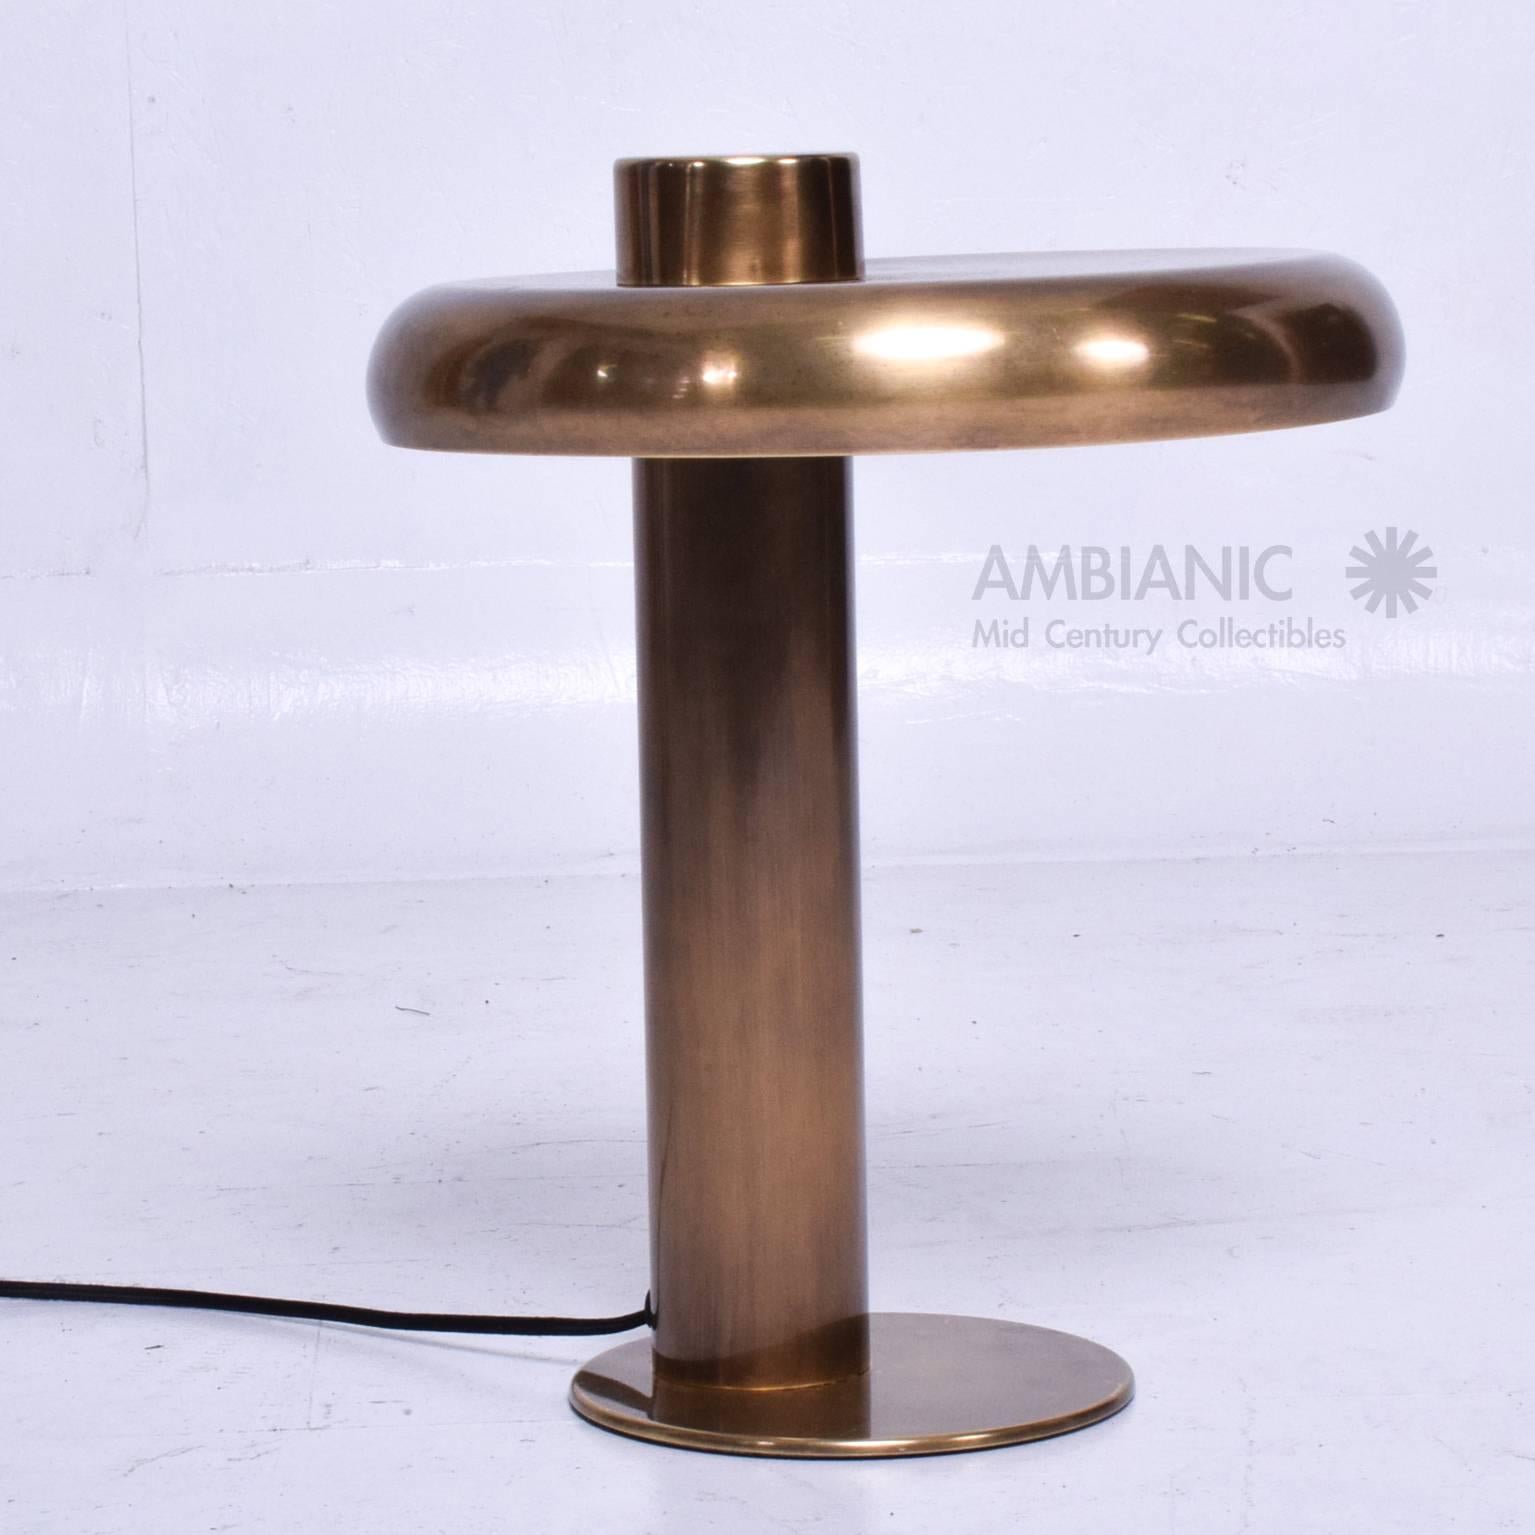 For your consideration a beautiful table lamp by Koch & Lowy. 
Patinated brass with new electrical cord in satin black.

Lamp is amazing and its ready to go.

Measures: 16